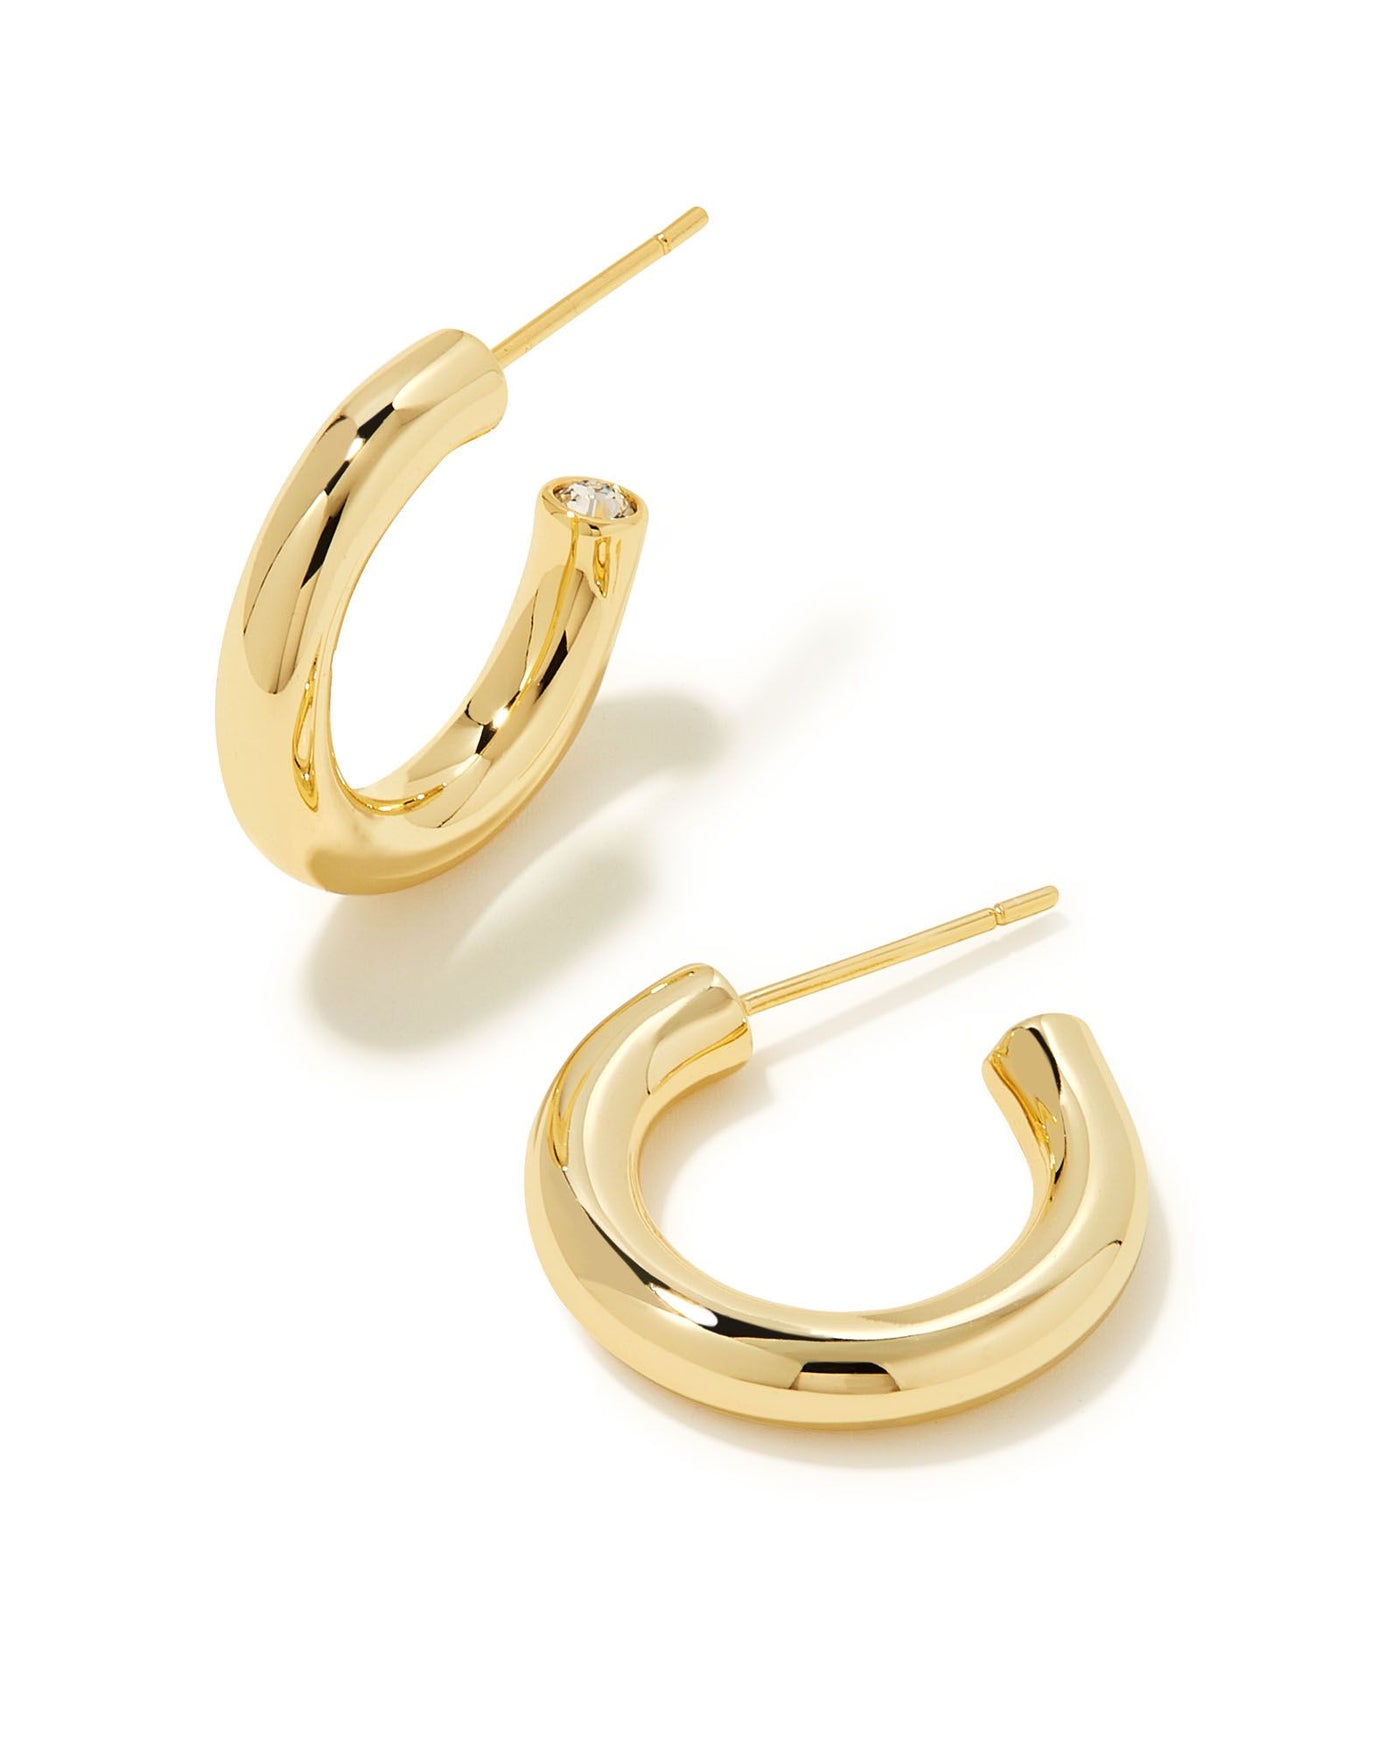 Kendra Scott Colette Huggie Earrings-Earrings-Kendra Scott-Market Street Nest, Fashionable Clothing, Shoes and Home Décor Located in Mabank, TX